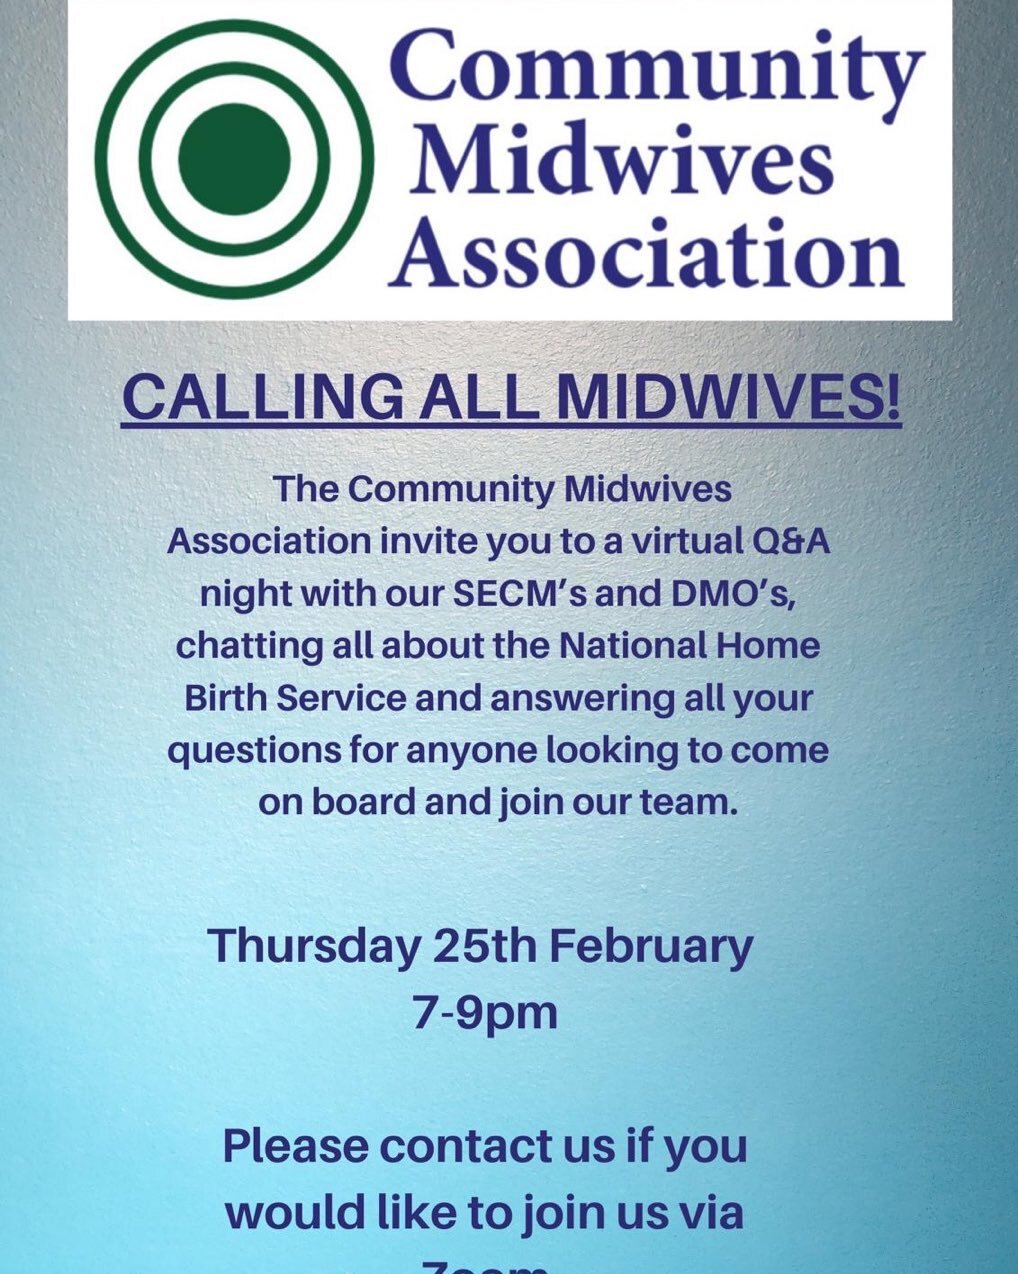 We are hosting an open evening for midwives looking for information about the homebirth service